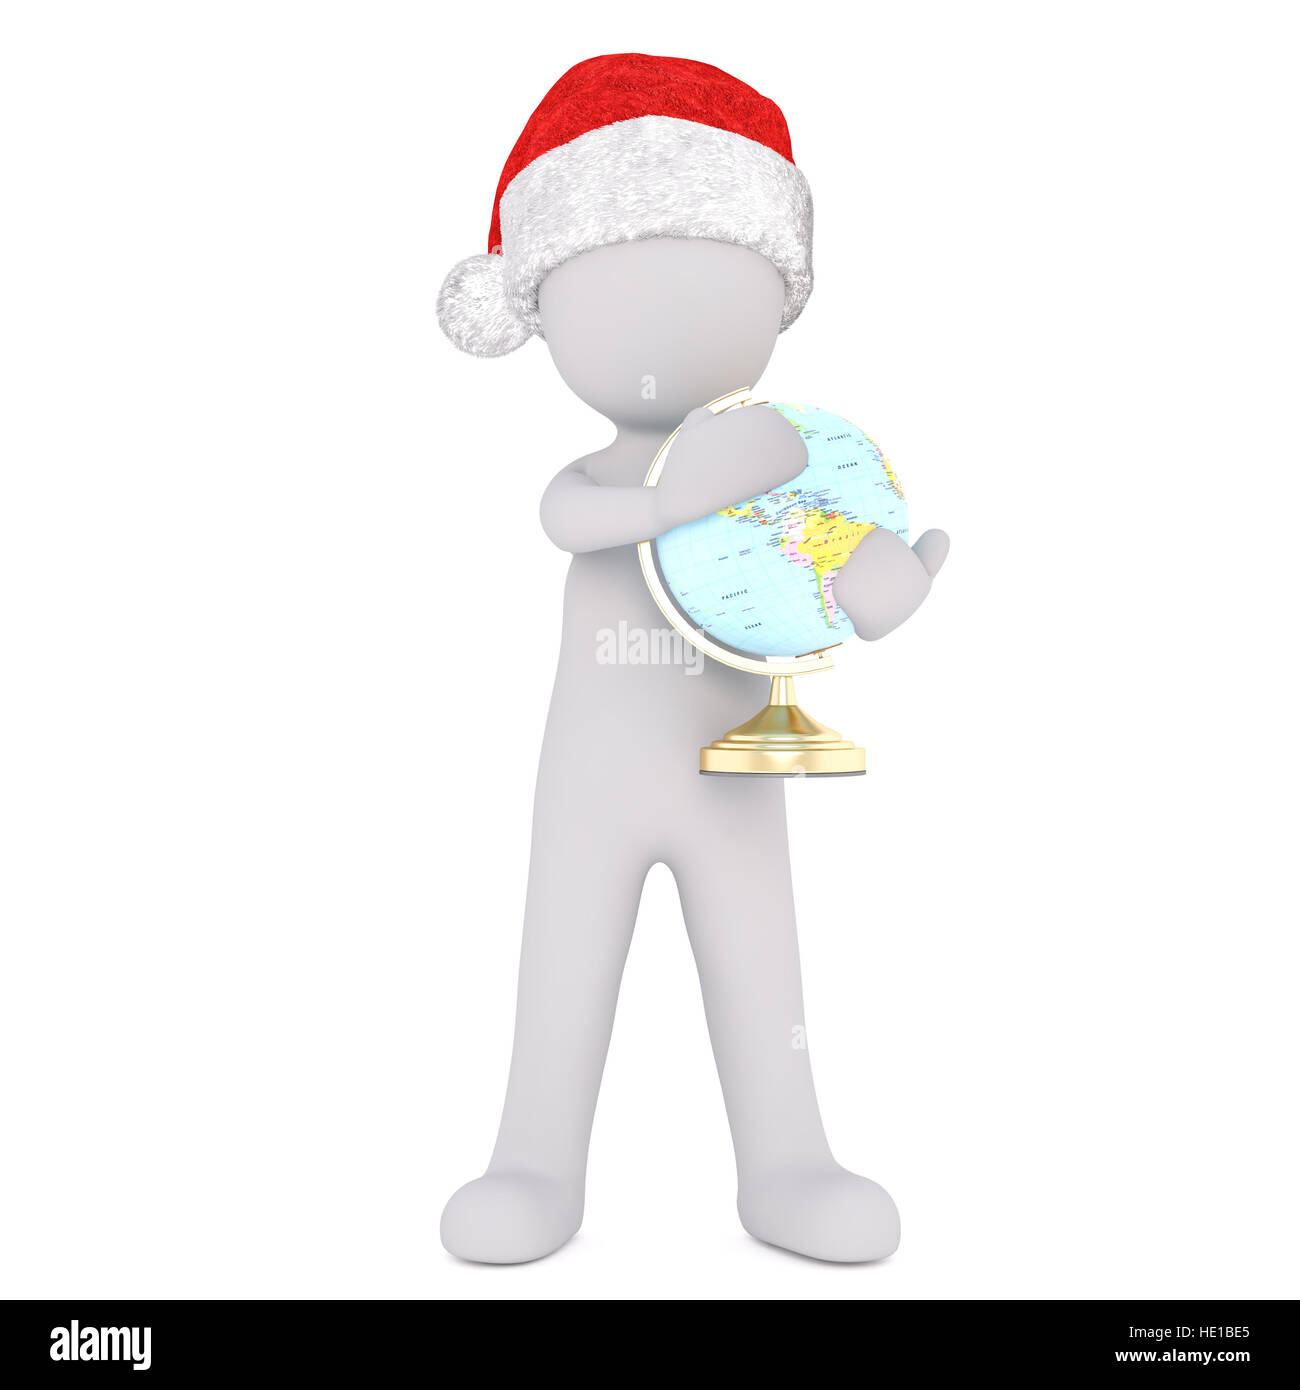 3d man wearing a festive red Santa hat planning his Christmas vacation standing clutching a world globe in his arms, isolated 3d rendered illustration Stock Photo